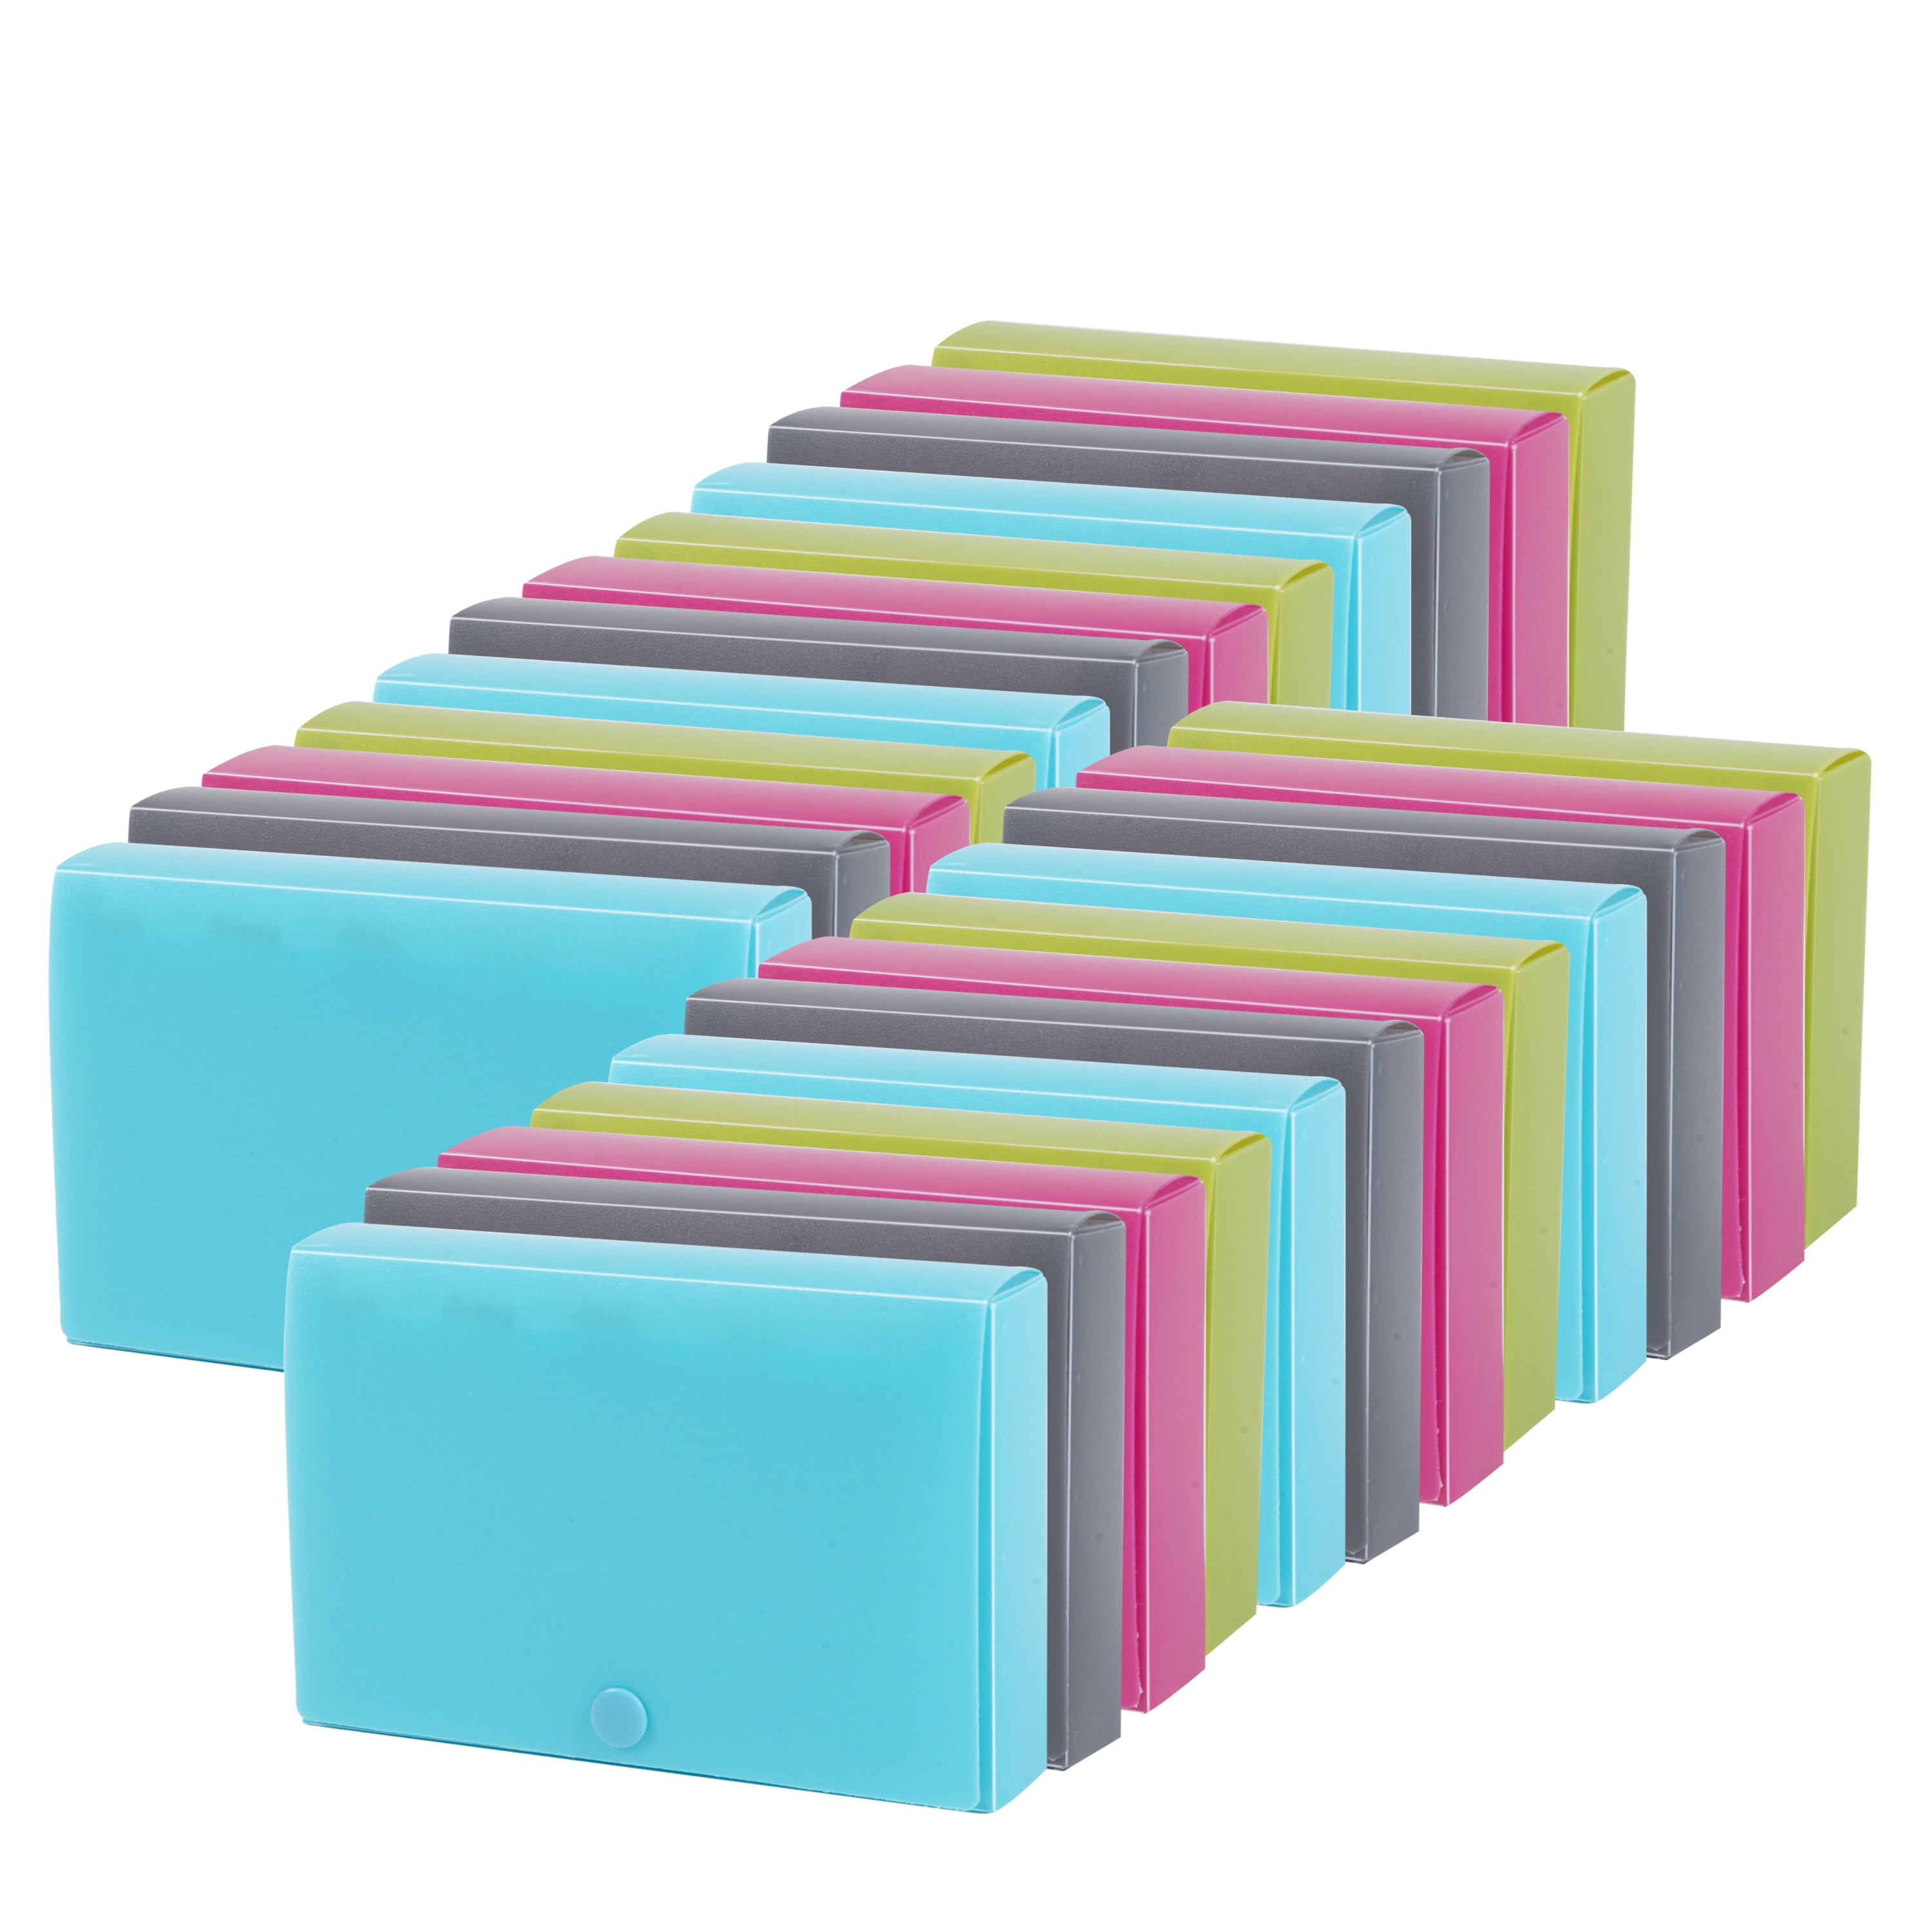 DocIt Index Card Holder 3 x 5 ruled or unruled cards, capacity